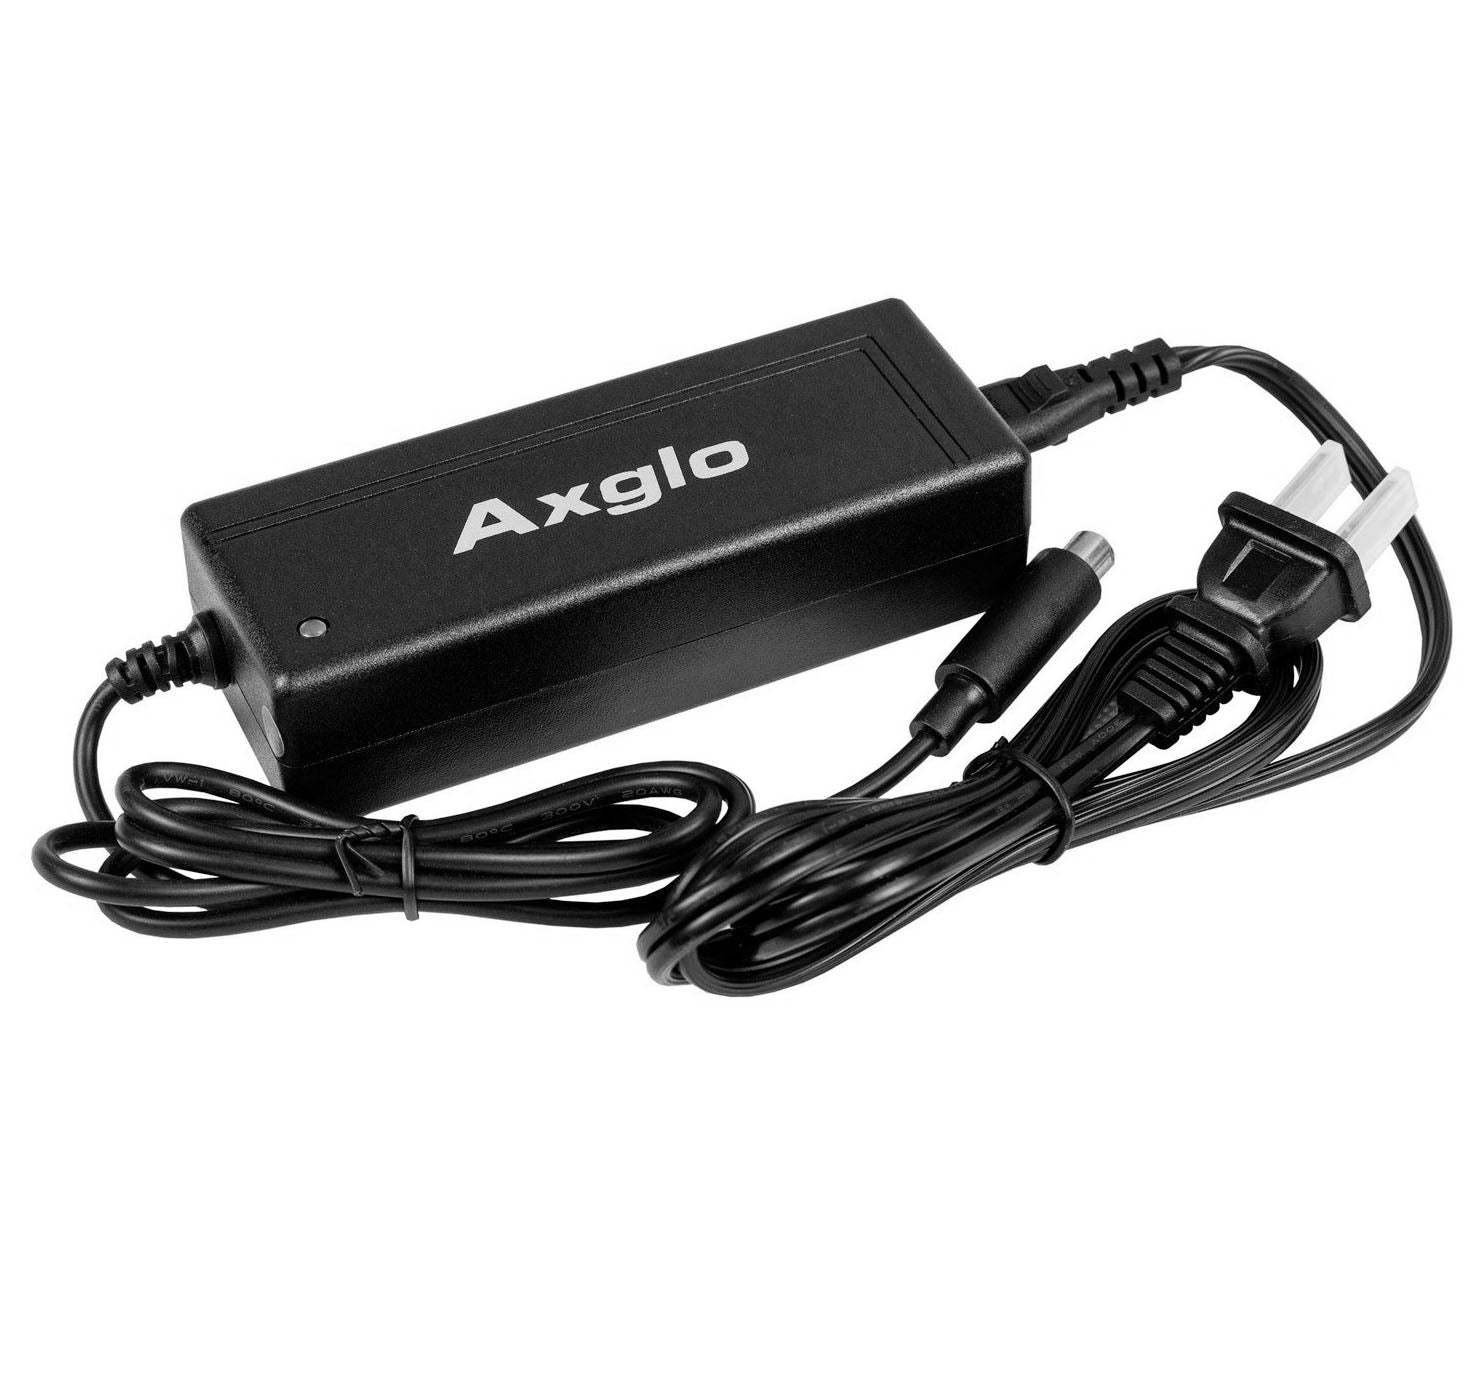 Axglo Charger for Electric Golf Push Cart